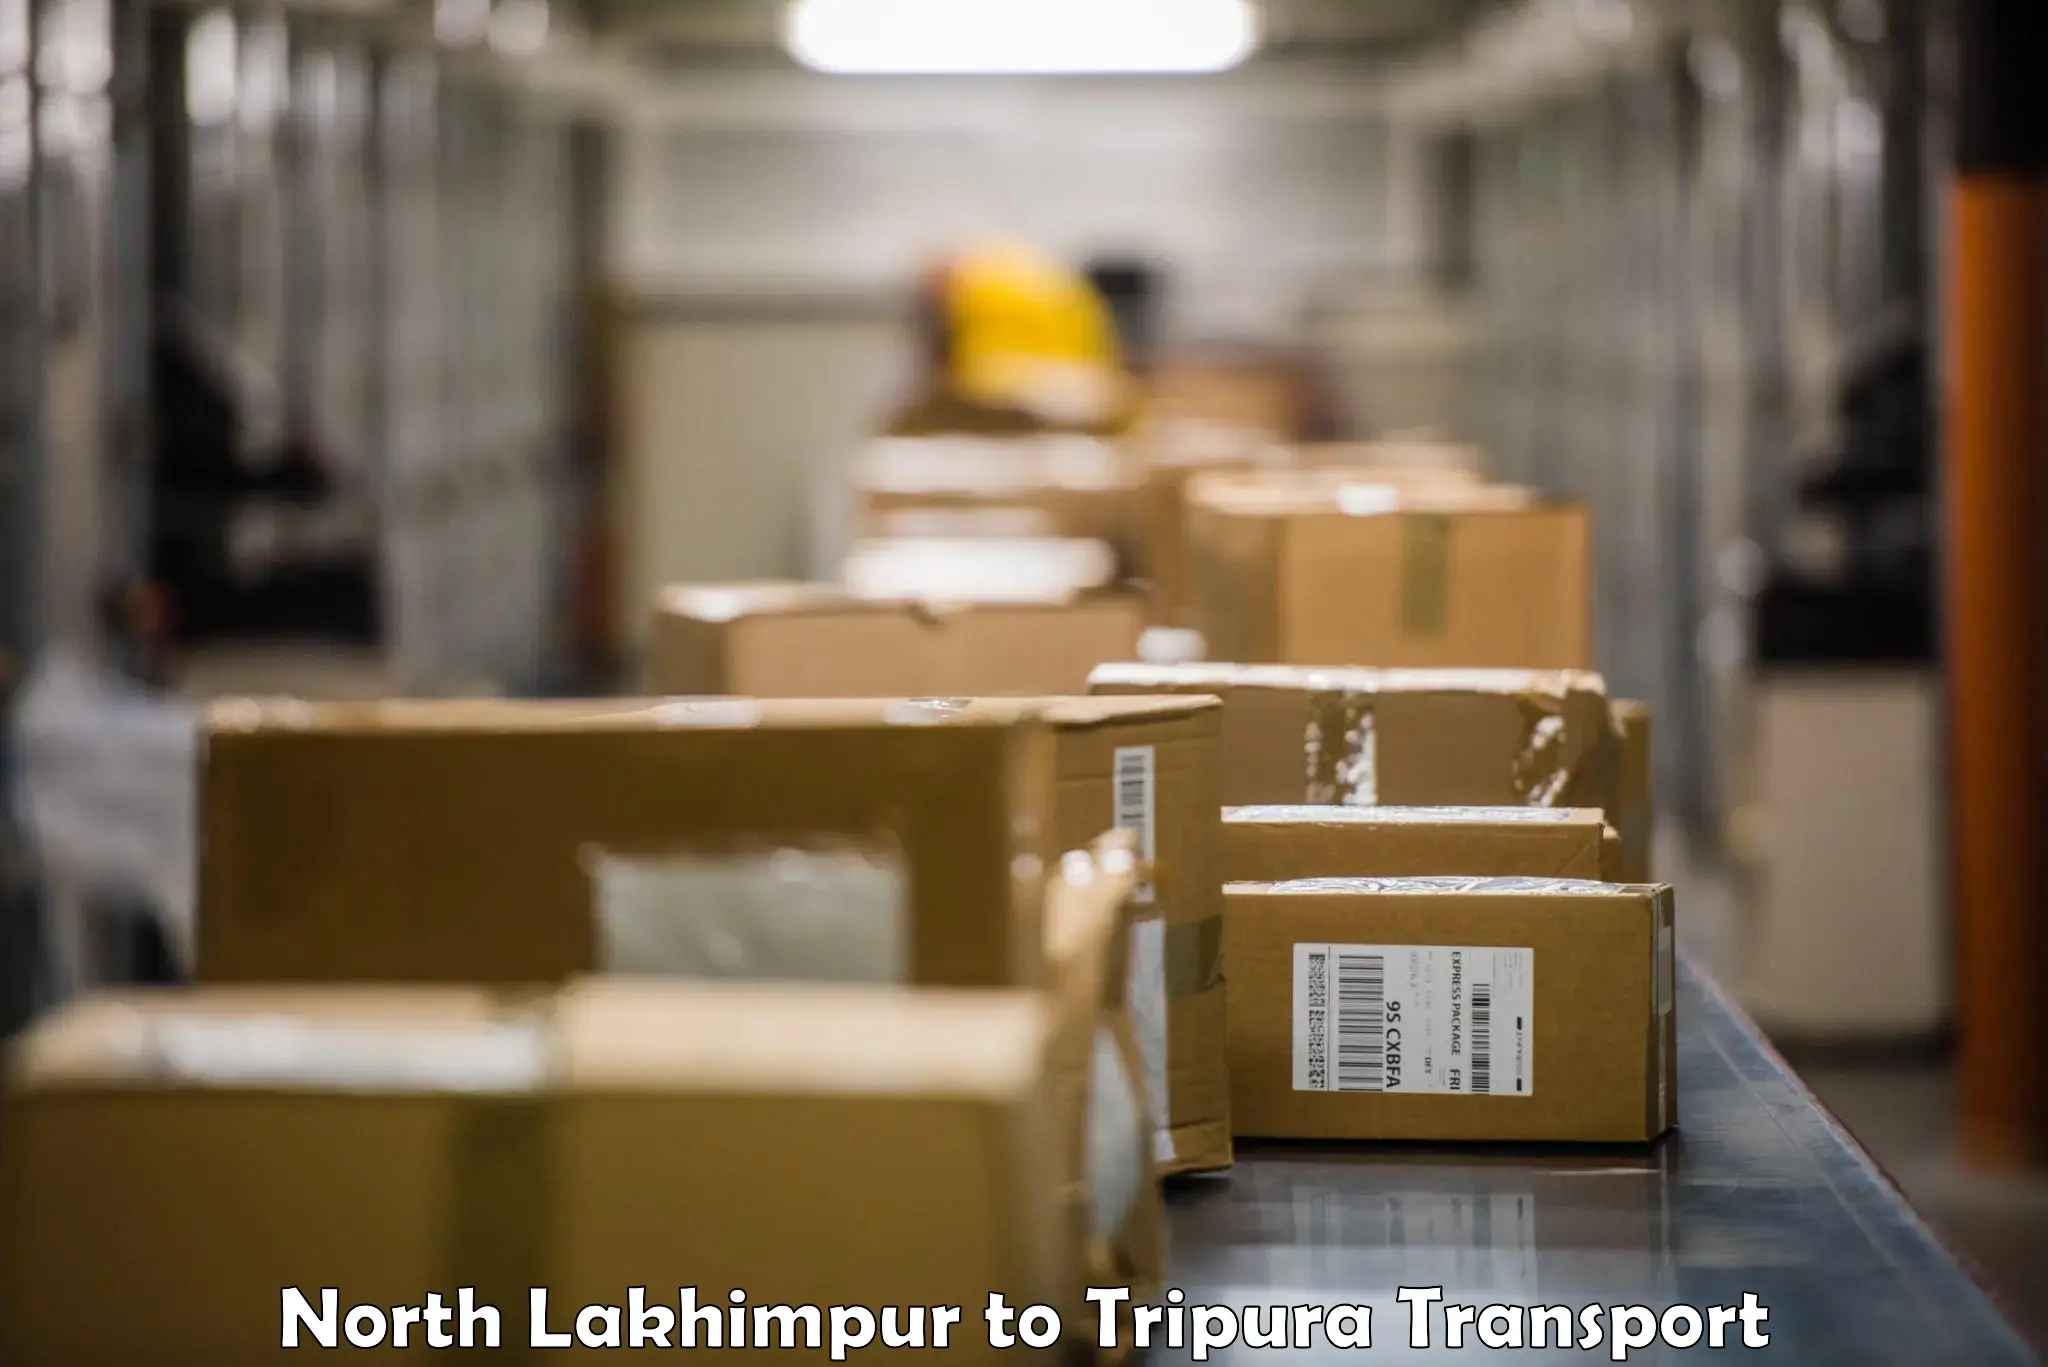 Goods delivery service North Lakhimpur to Tripura